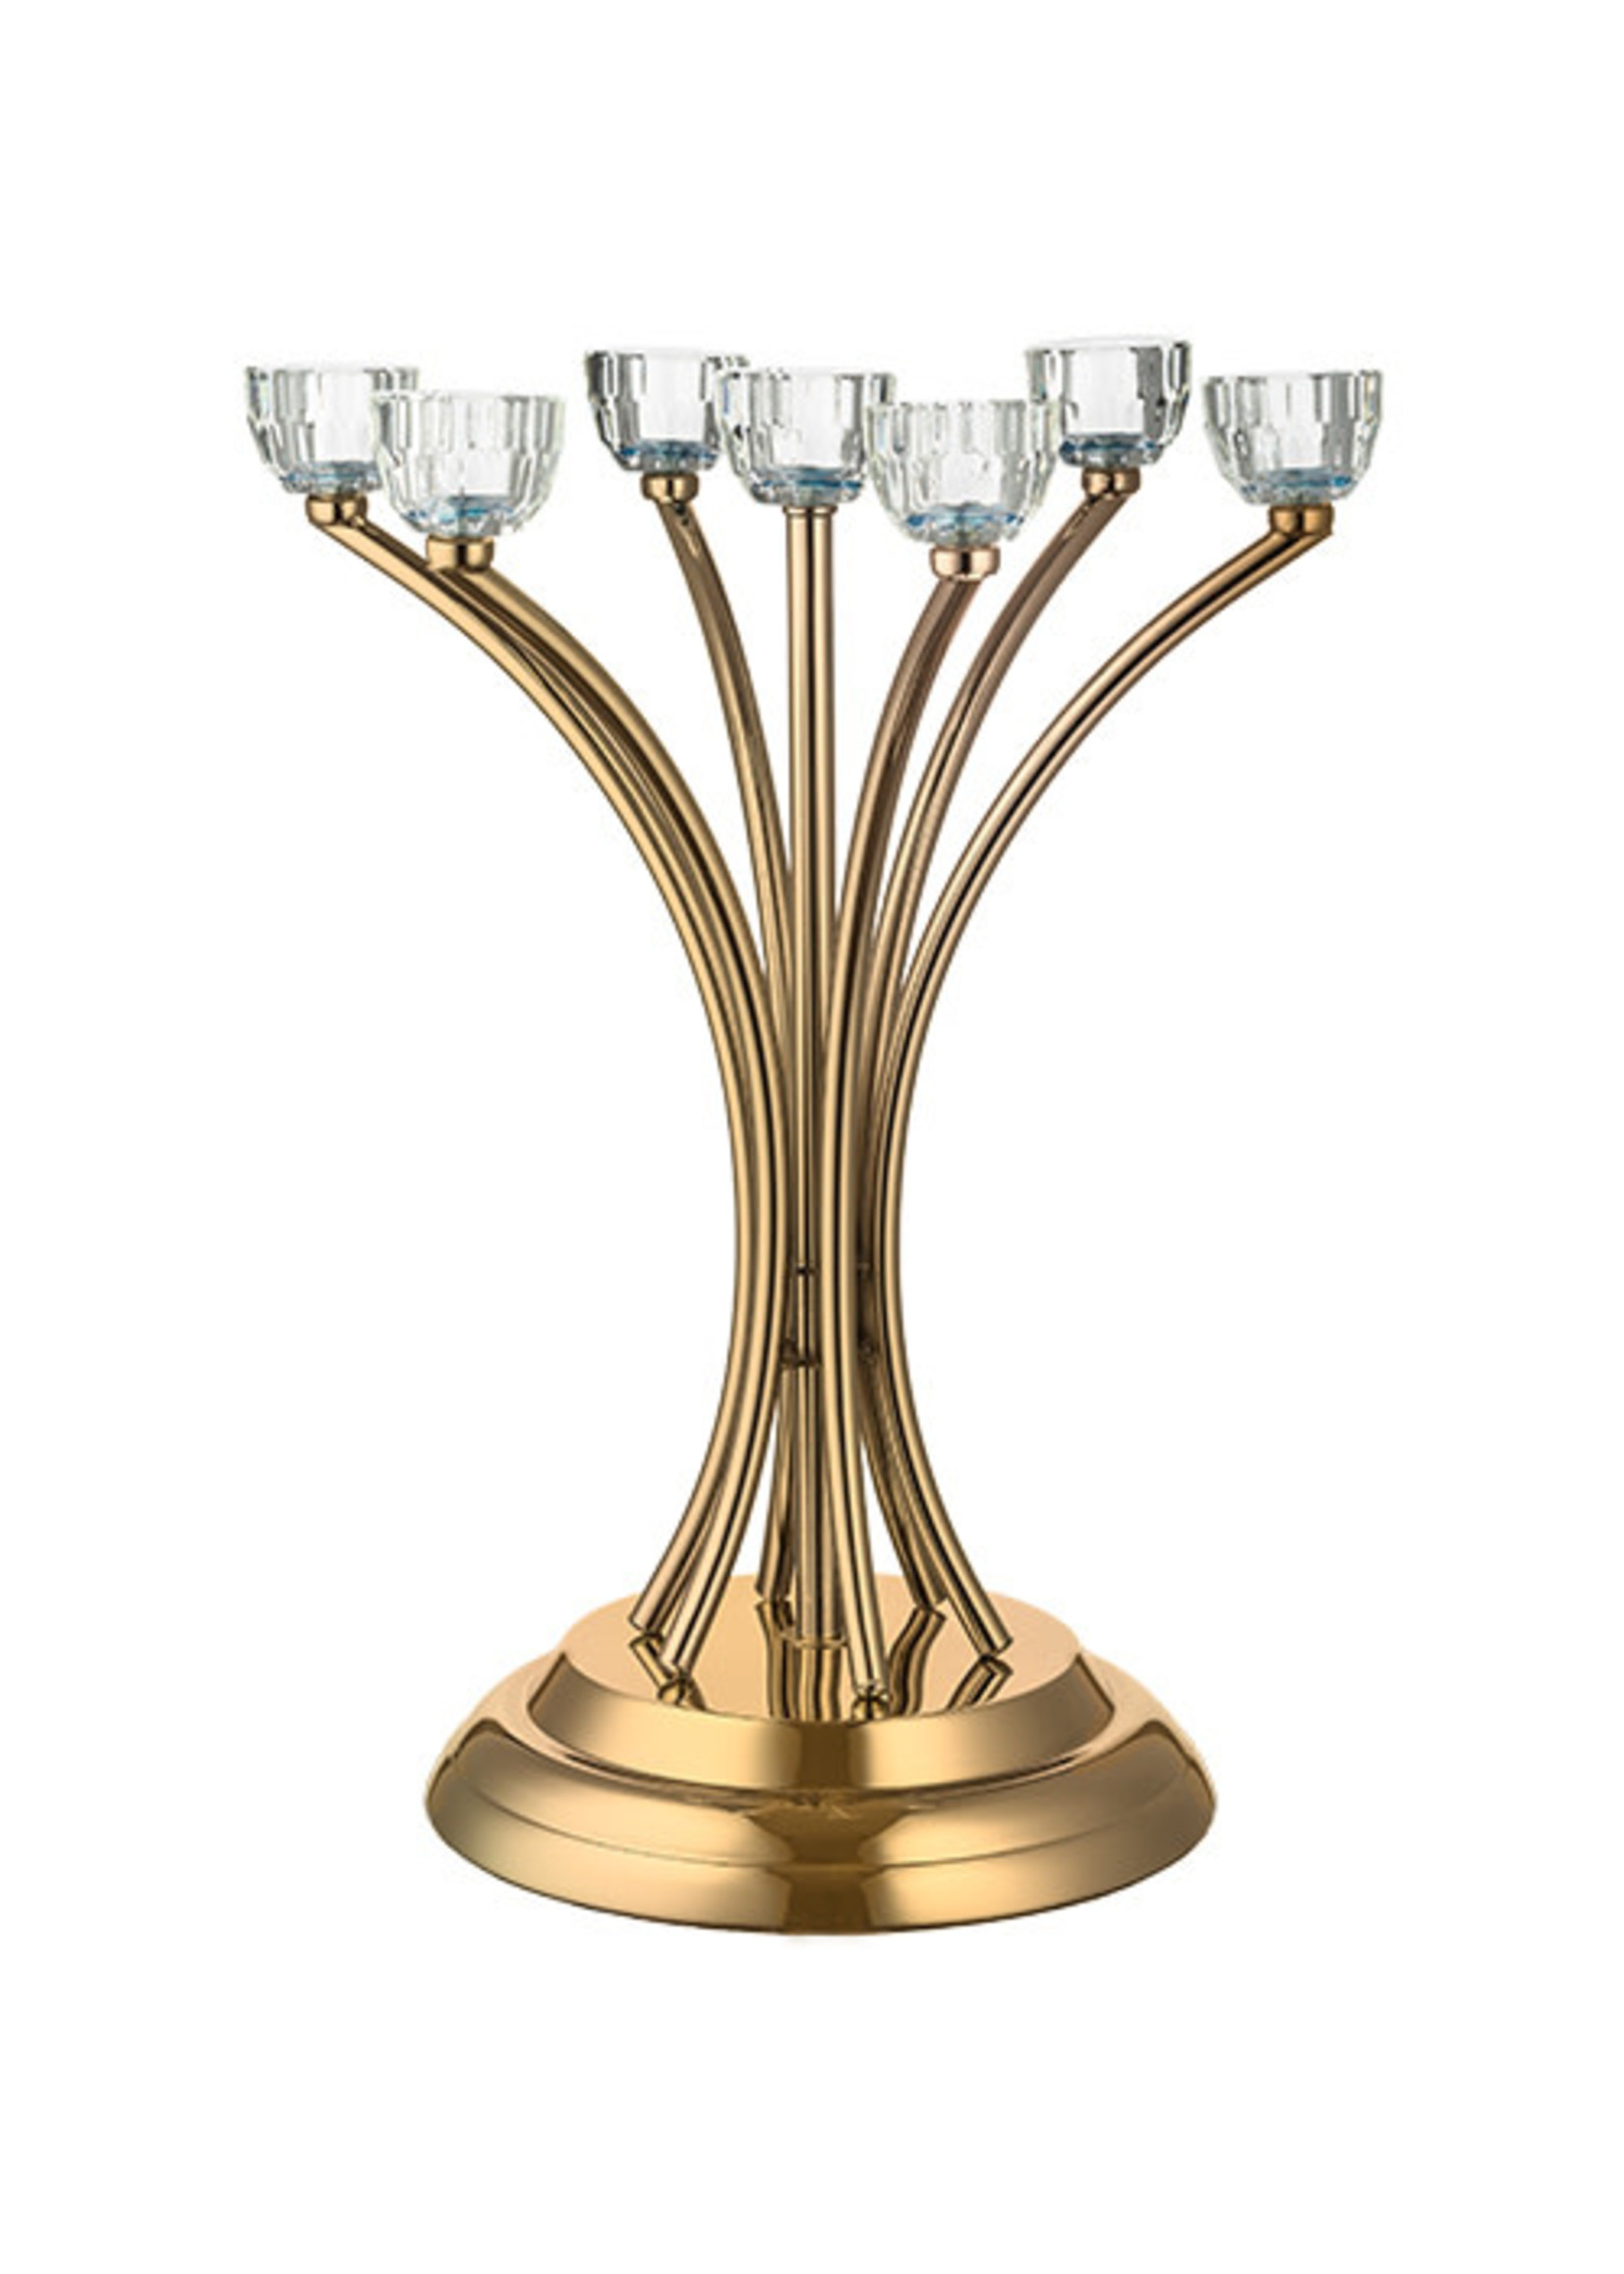 METAL CANDLESTICKS 7 BANCHES WITH CRYSTAL-35CM